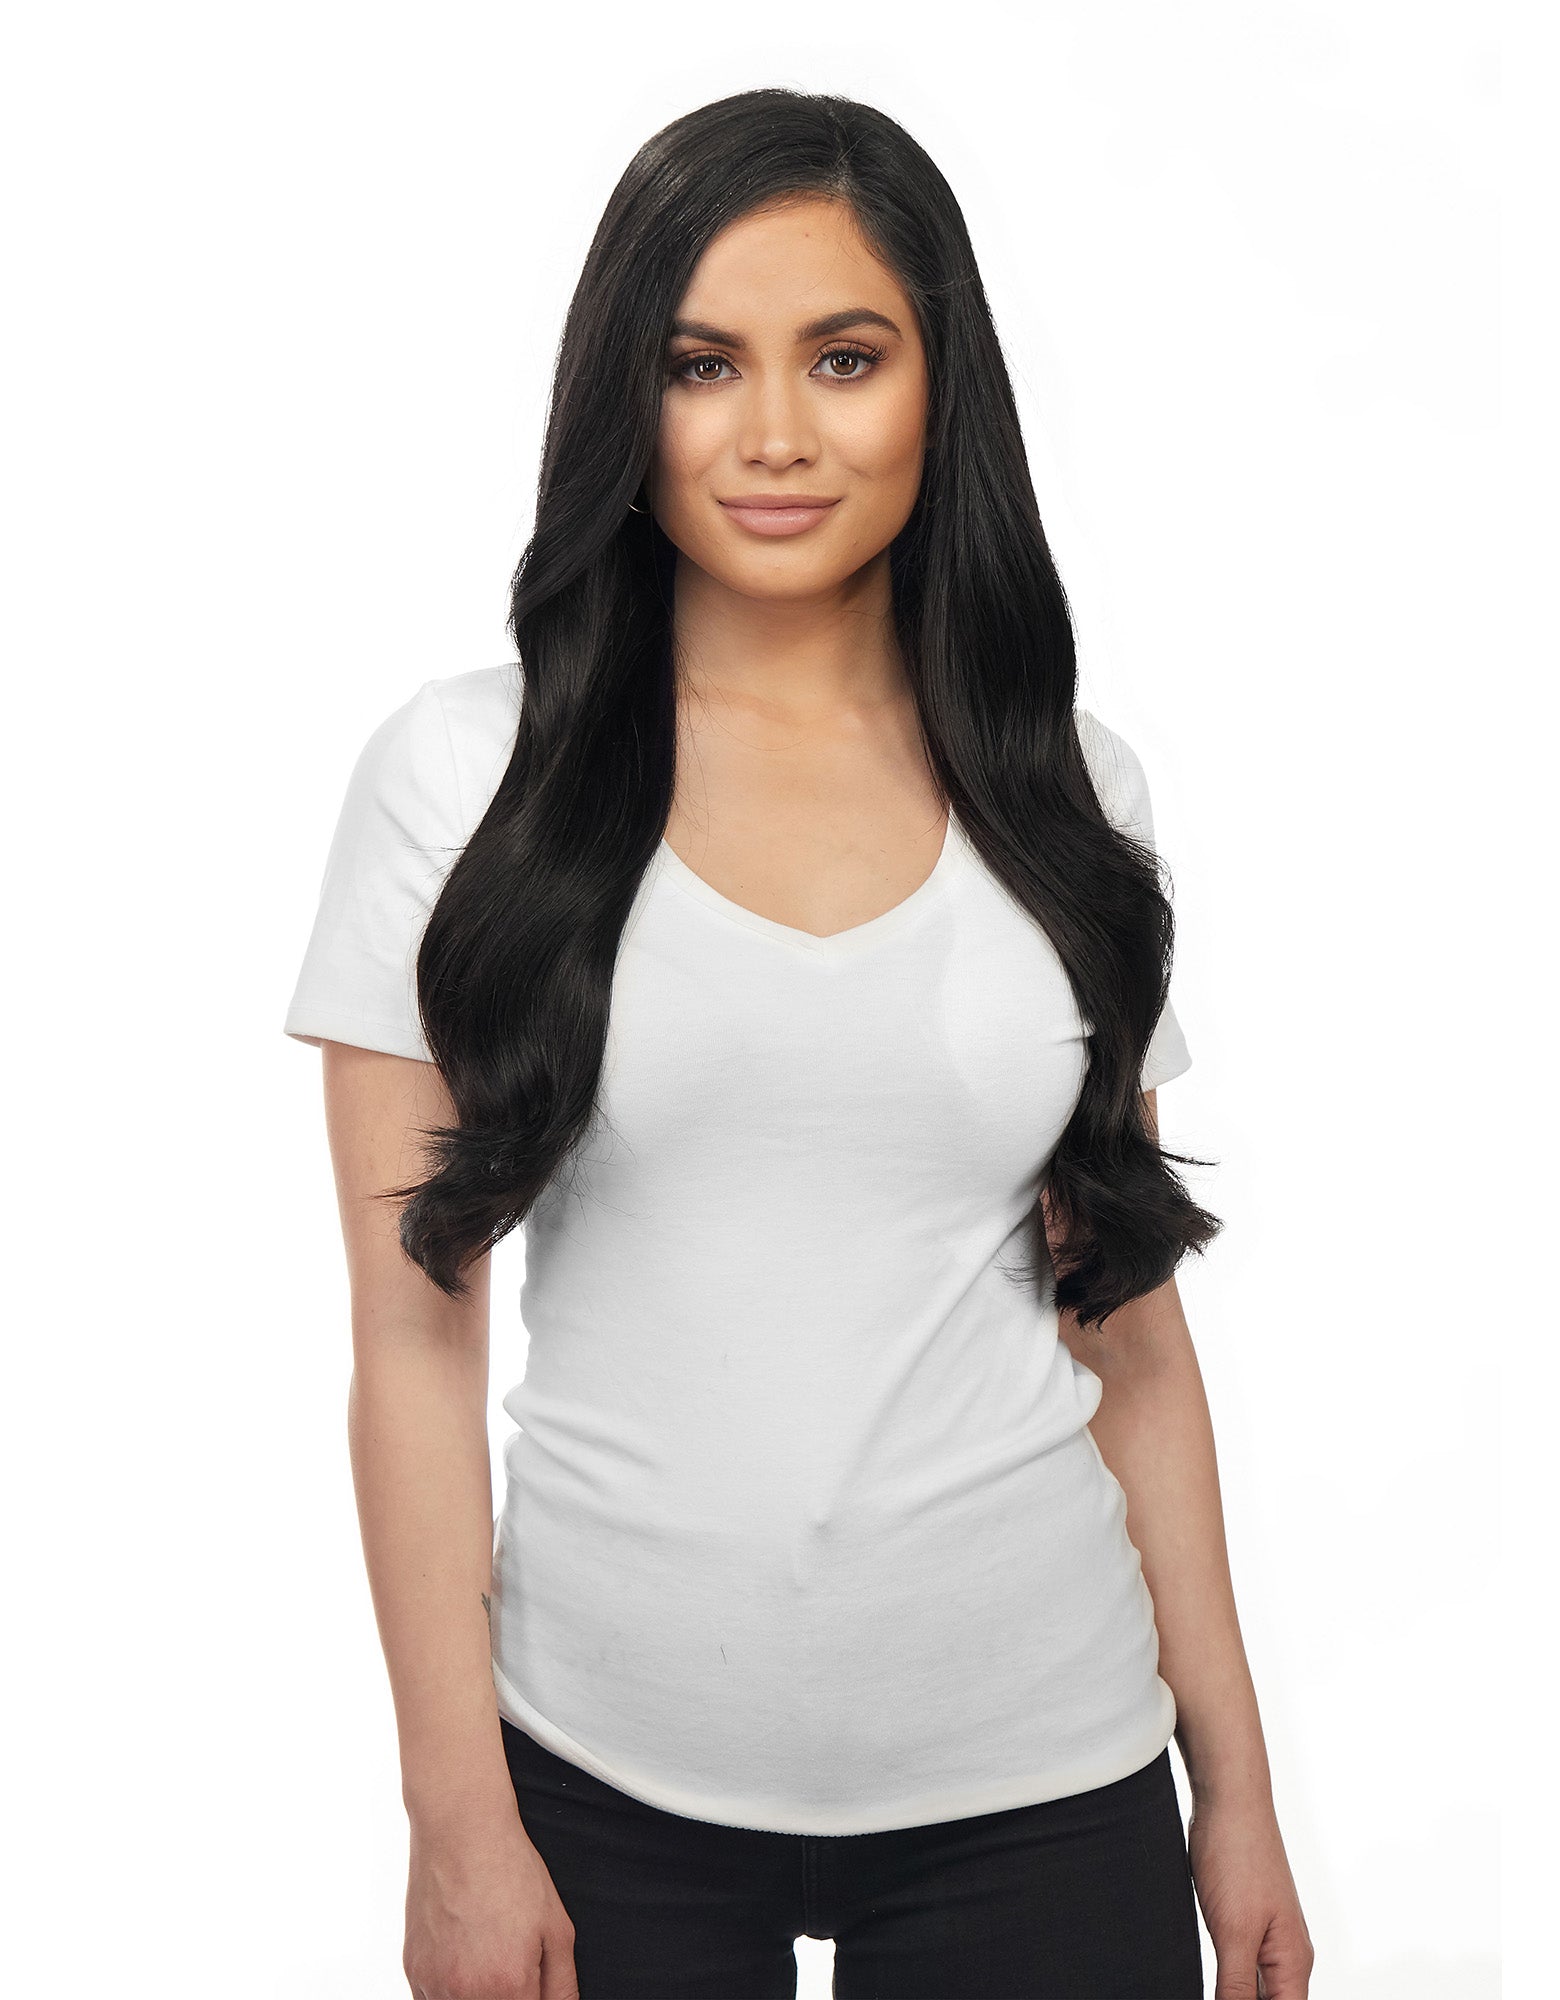 Great Lengths 20inch strands image courtesty Great Lengths Dubai   Beautiful long hair Long hair styles Remy human hair extensions